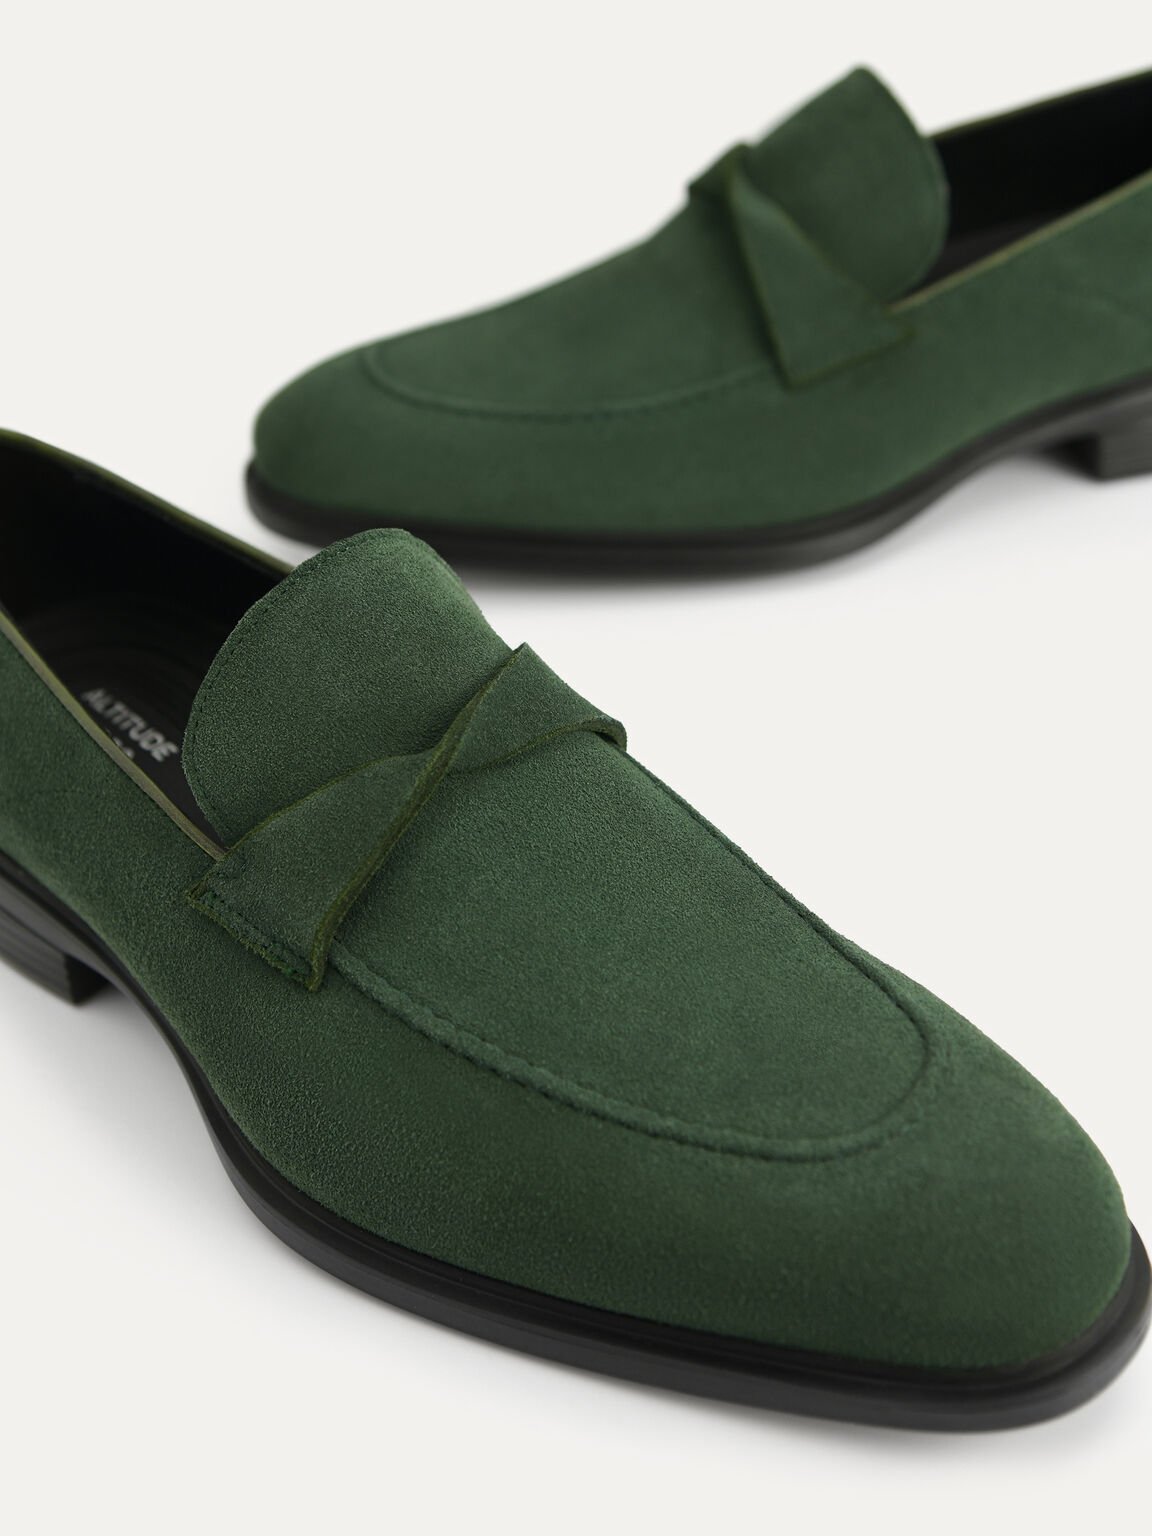 Altitude Leather Loafers, Dark Green